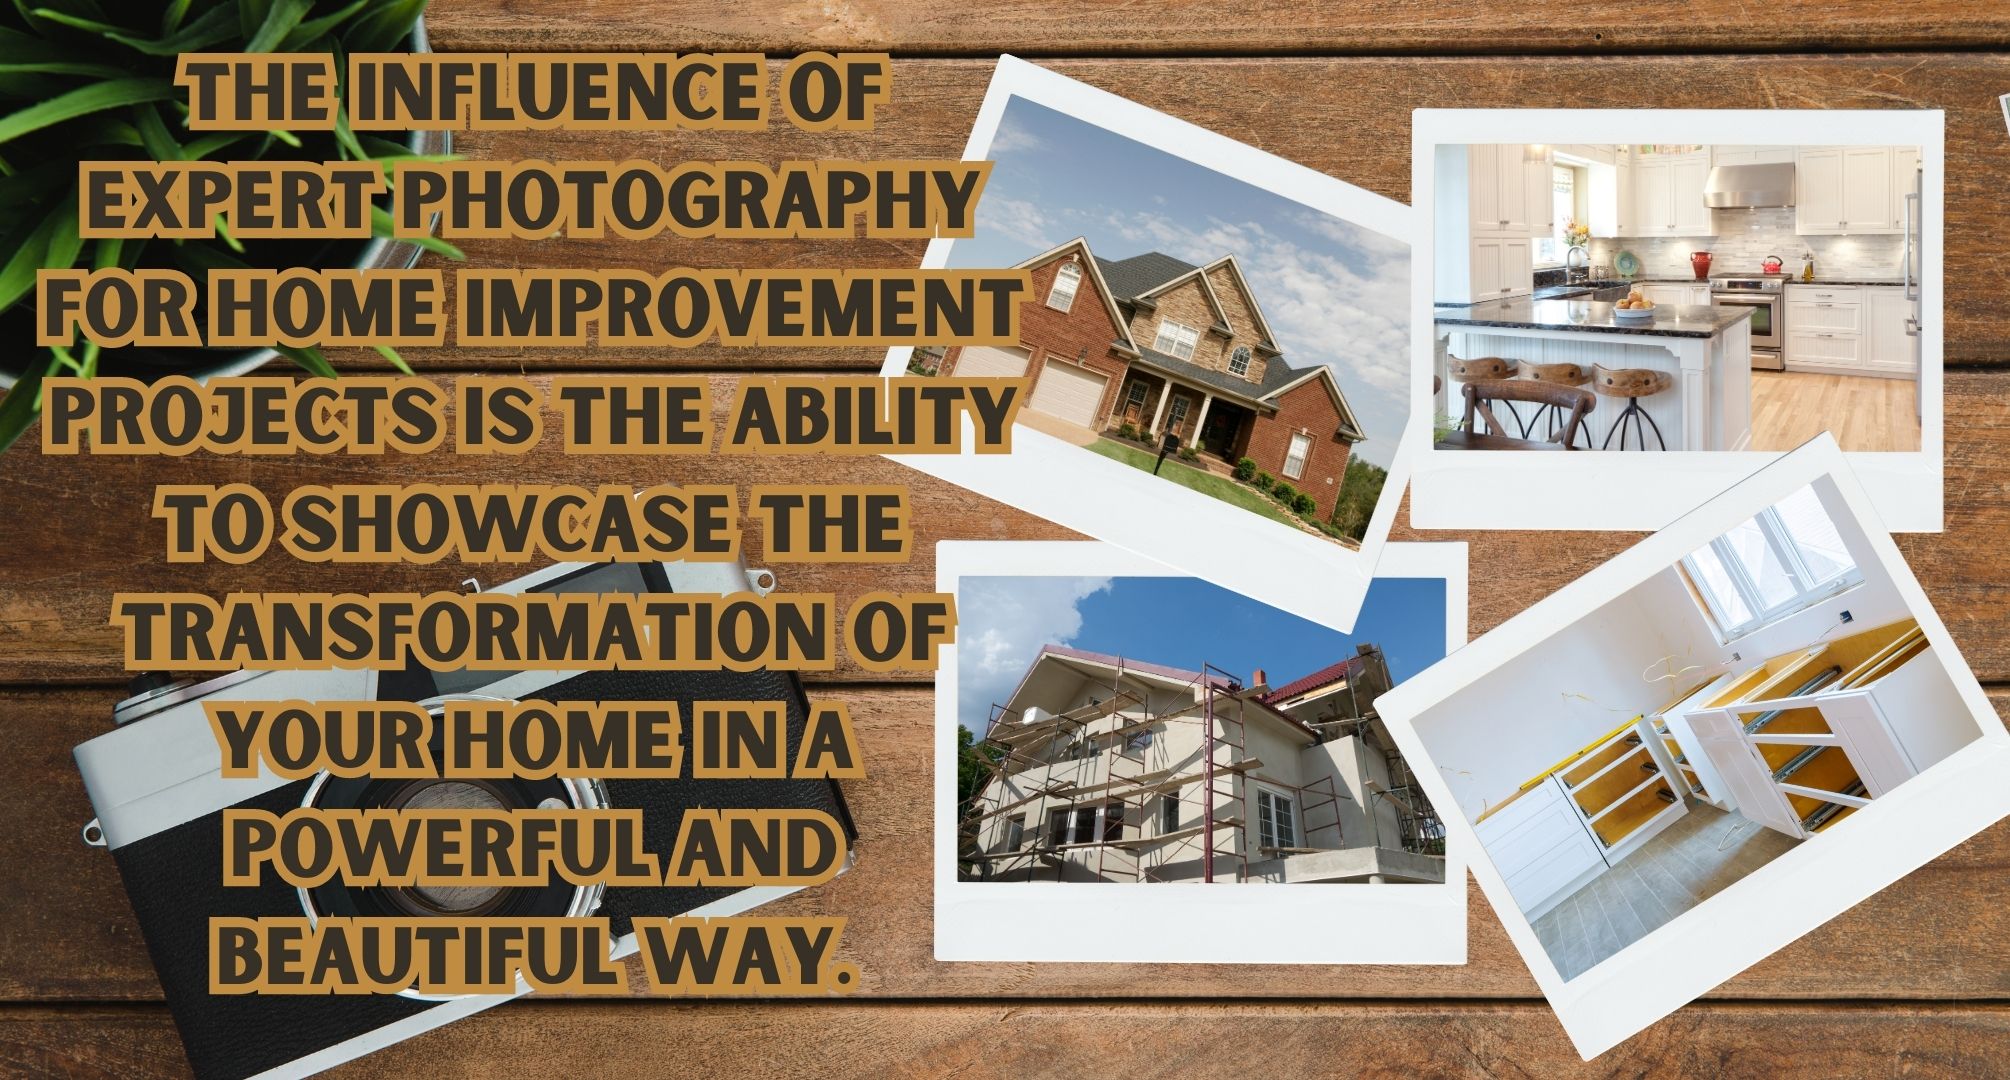 Bring Your Home Improvement Vision to Life with AliFelski Photography's Professional Photography Services